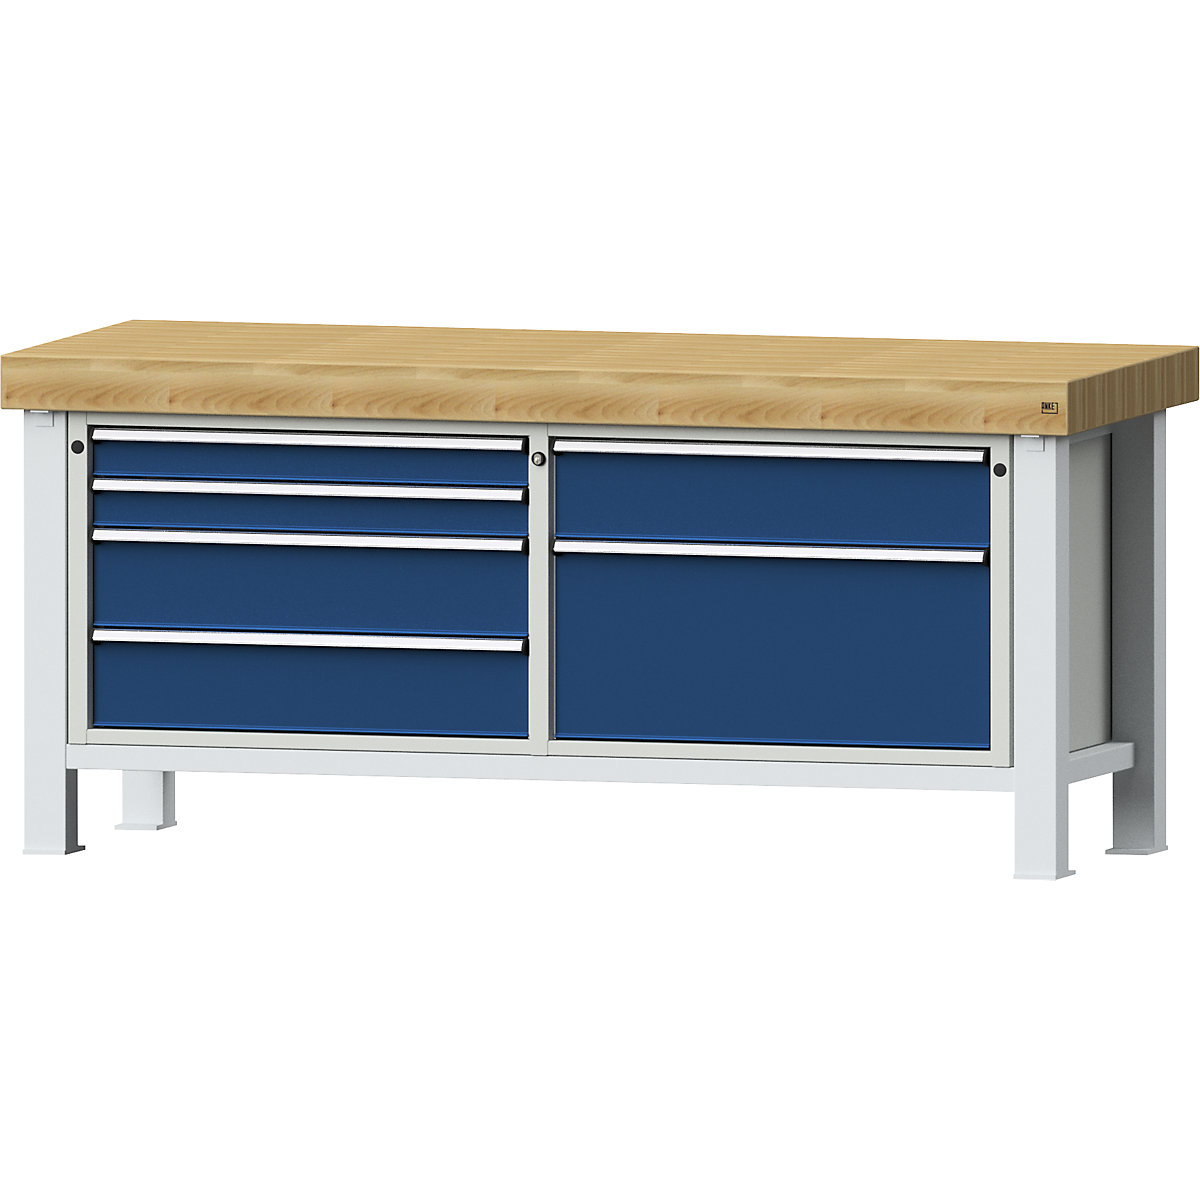 Heavy duty workbench – ANKE, 4 drawers on left, 2 drawers on right, solid beech worktop 100 mm-1